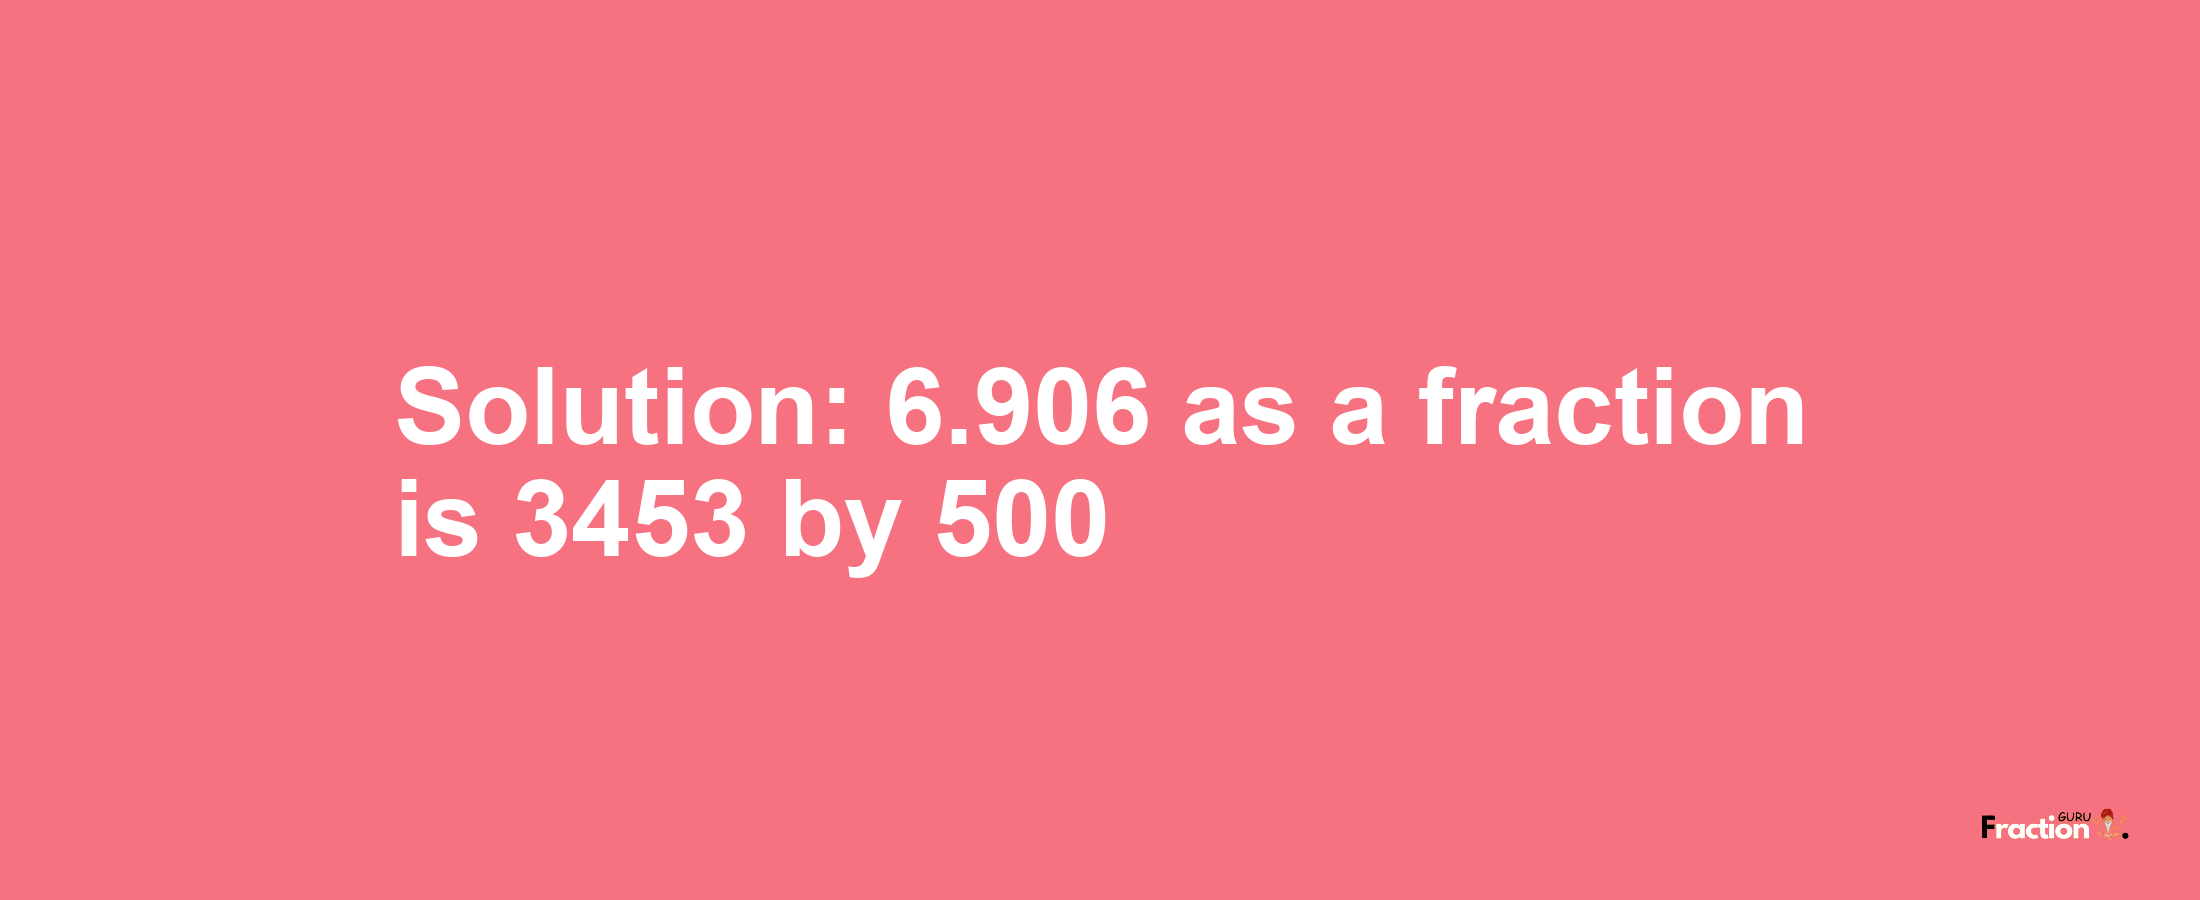 Solution:6.906 as a fraction is 3453/500